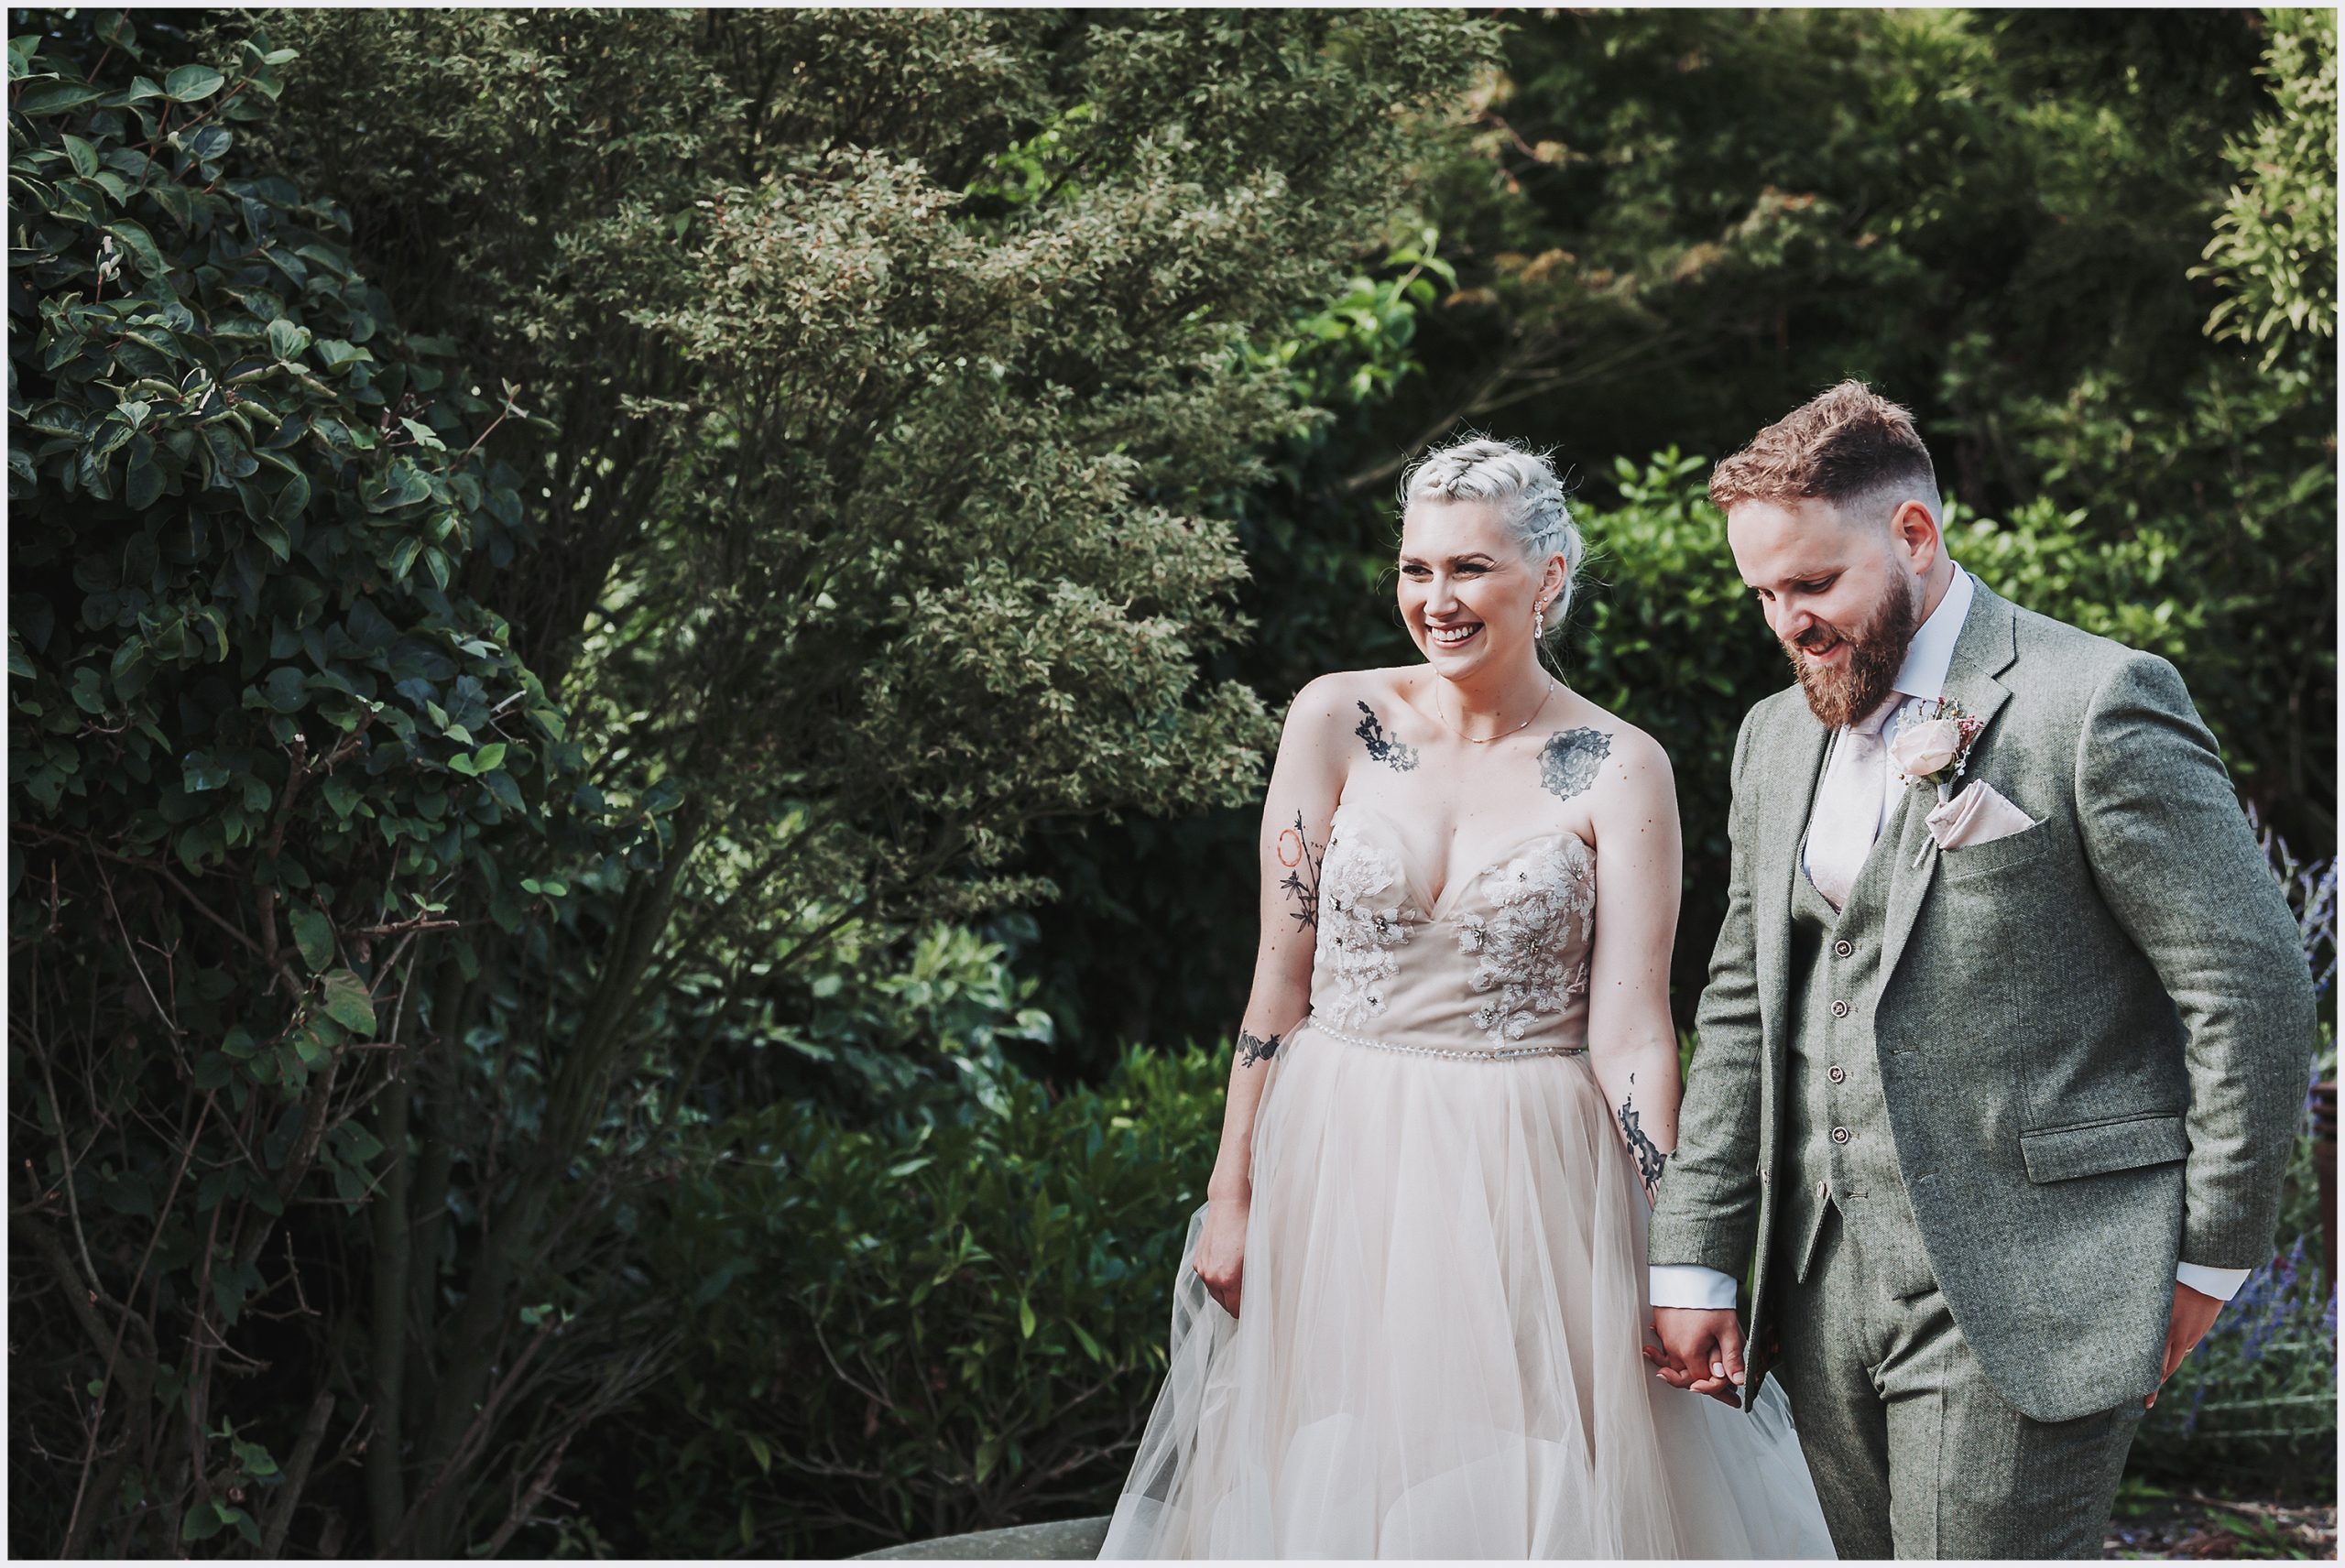 Cheshire's Endless Love: Bride and Groom Share a Blissful Moment